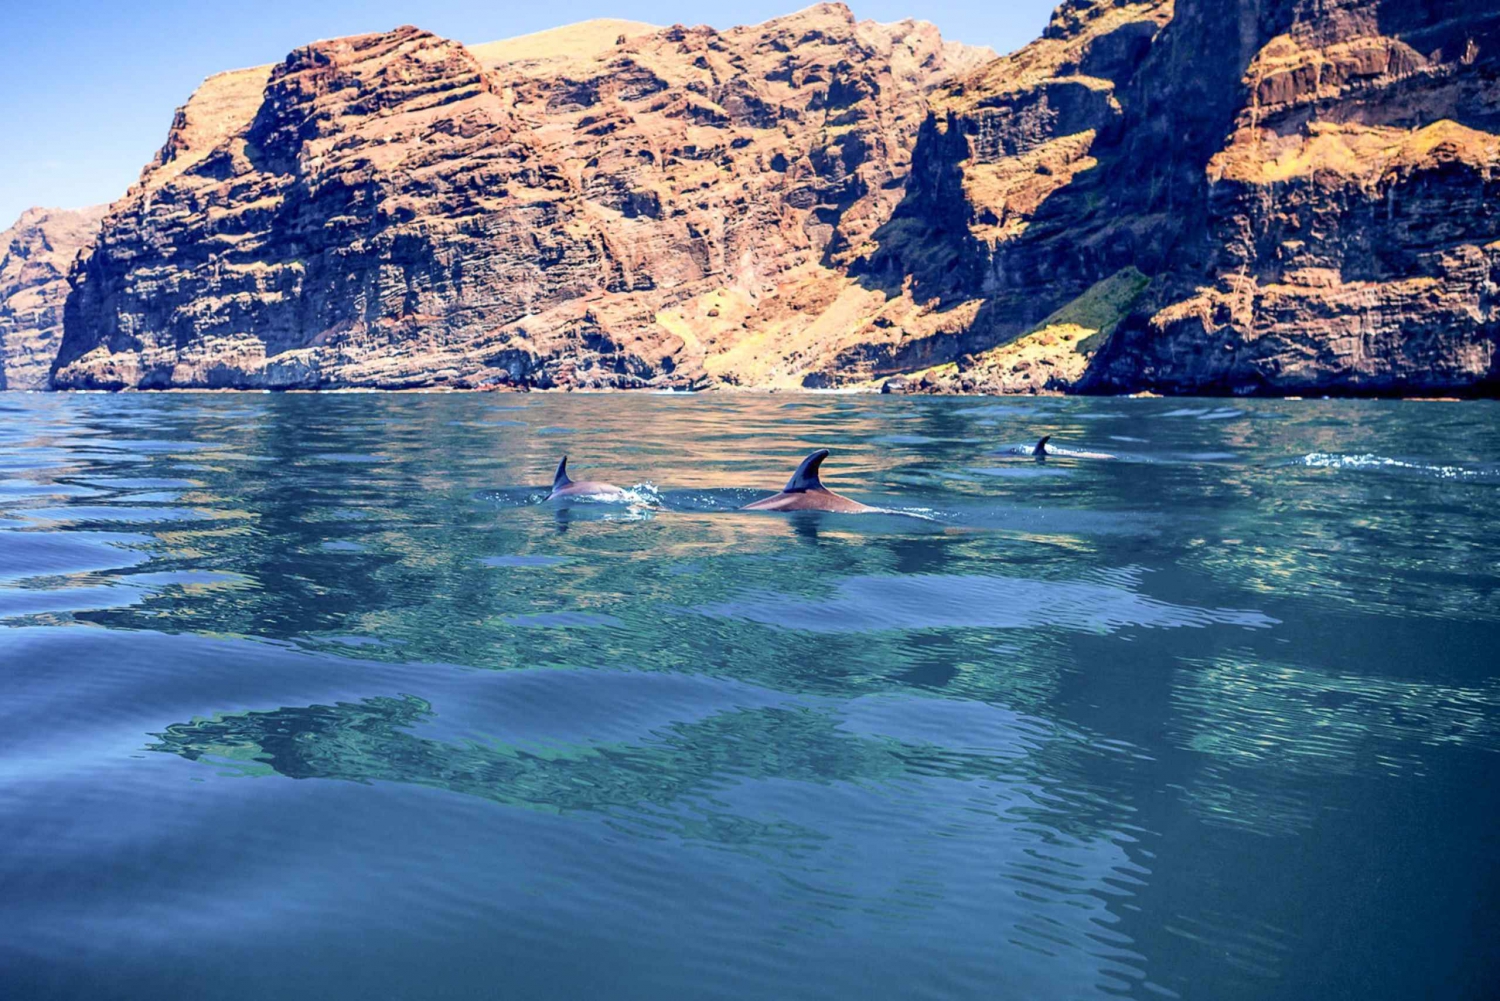 Tenerife: Dolphin and Whale Eco-Cruise with Snack & Drinks